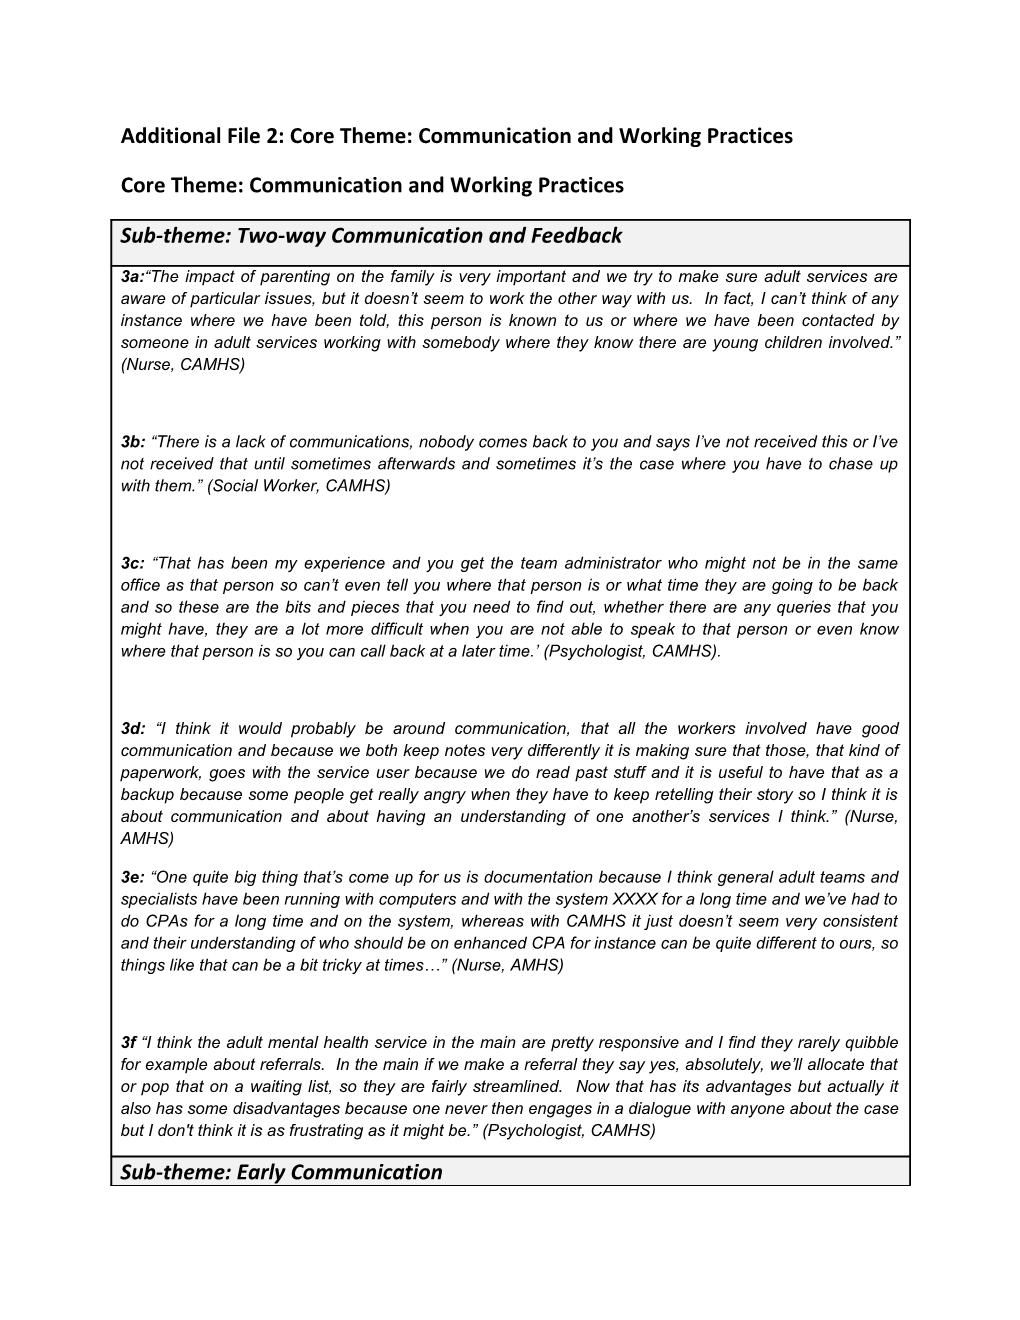 Additional File 2:Core Theme: Communication and Working Practices